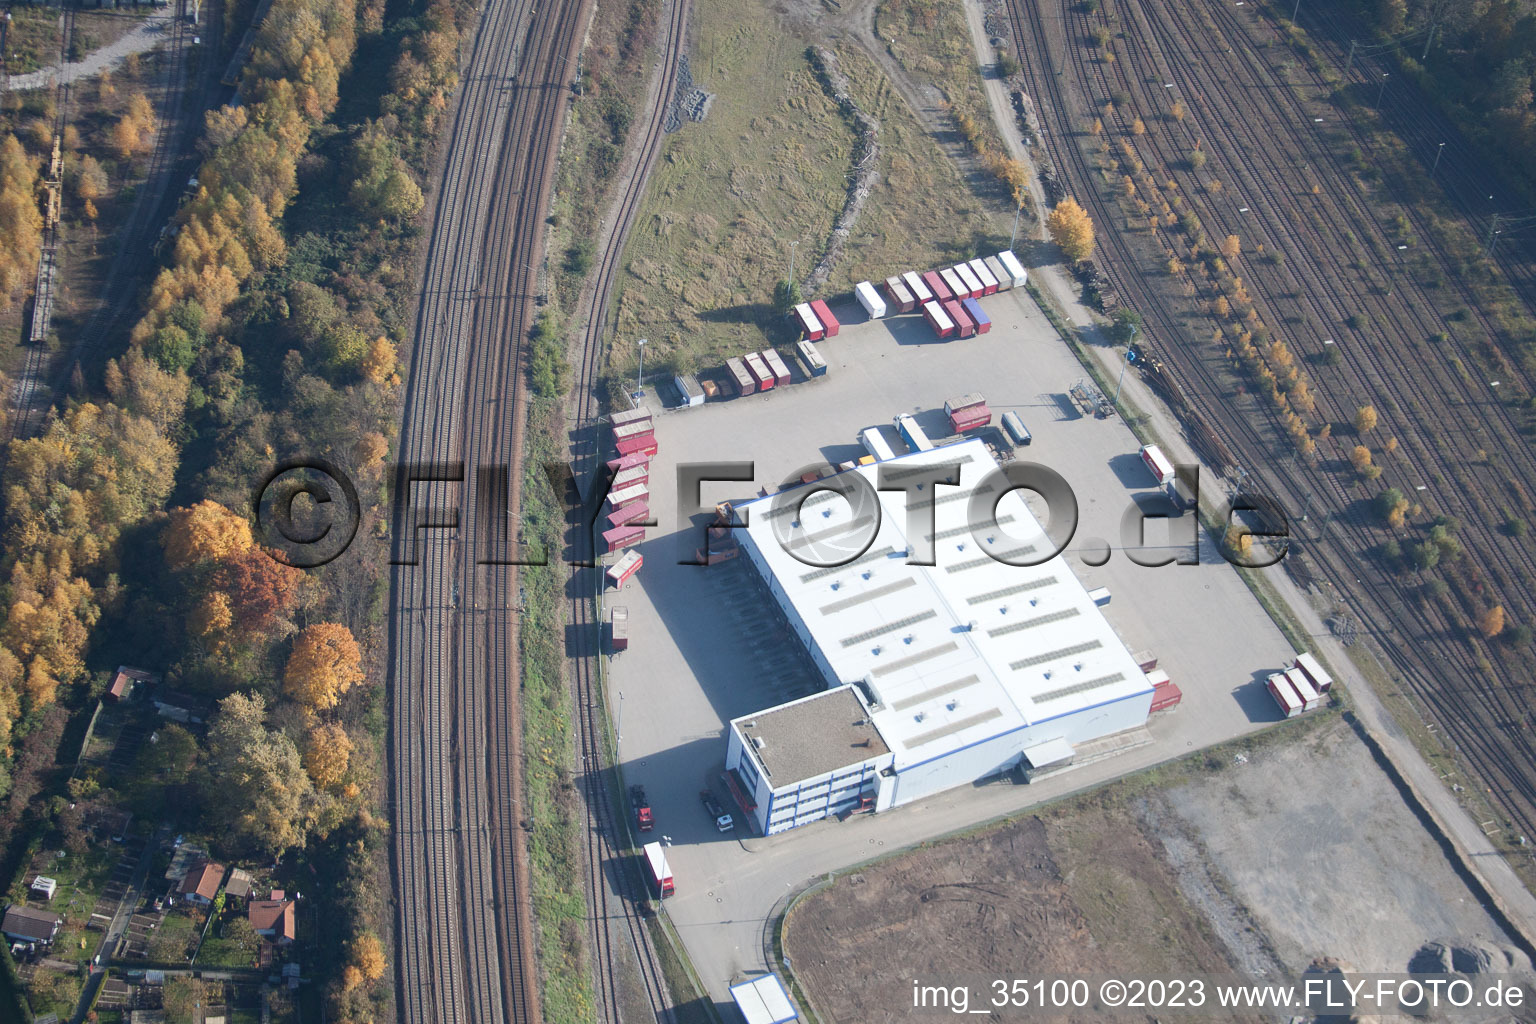 Aerial view of Emon's shipping company in the district Oststadt in Karlsruhe in the state Baden-Wuerttemberg, Germany